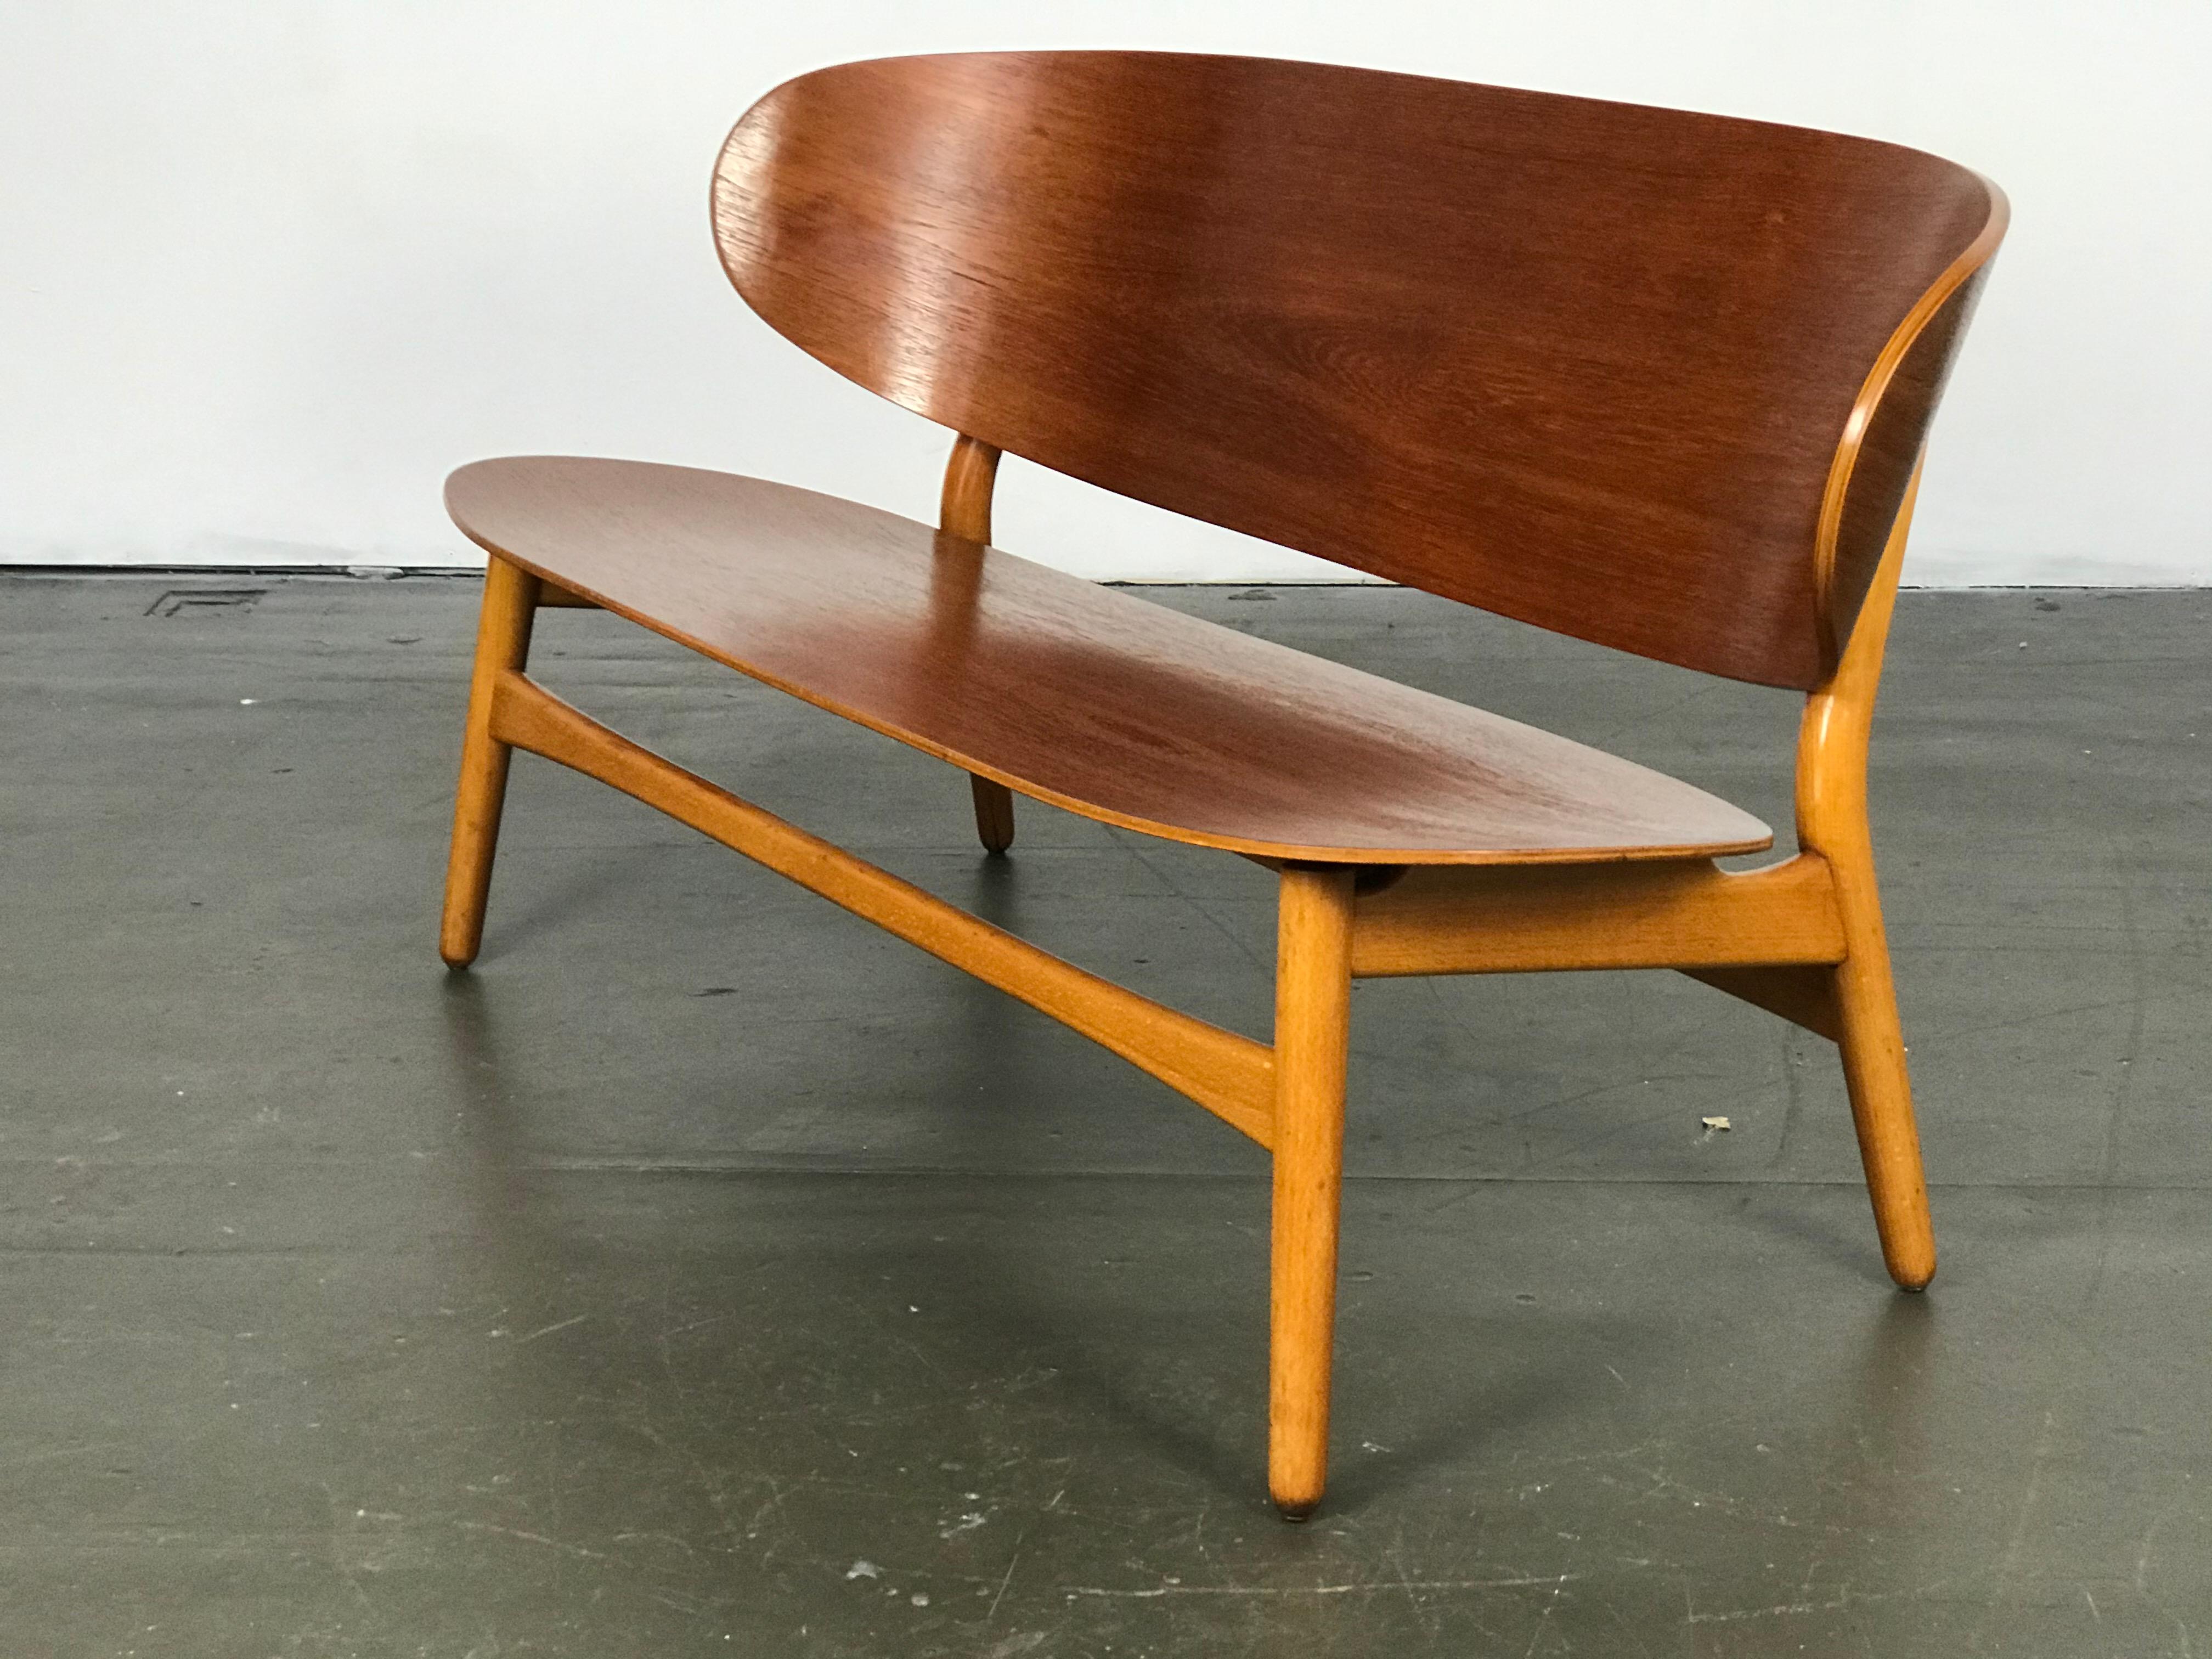 Early settee designed by Hans Wegner for Fritz Hansen in 1948. Made of teak and beech wood, this settee has been restored several years ago, yet still shows small areas of wear/age. Label remnant underneath. Early photos show these sometimes having